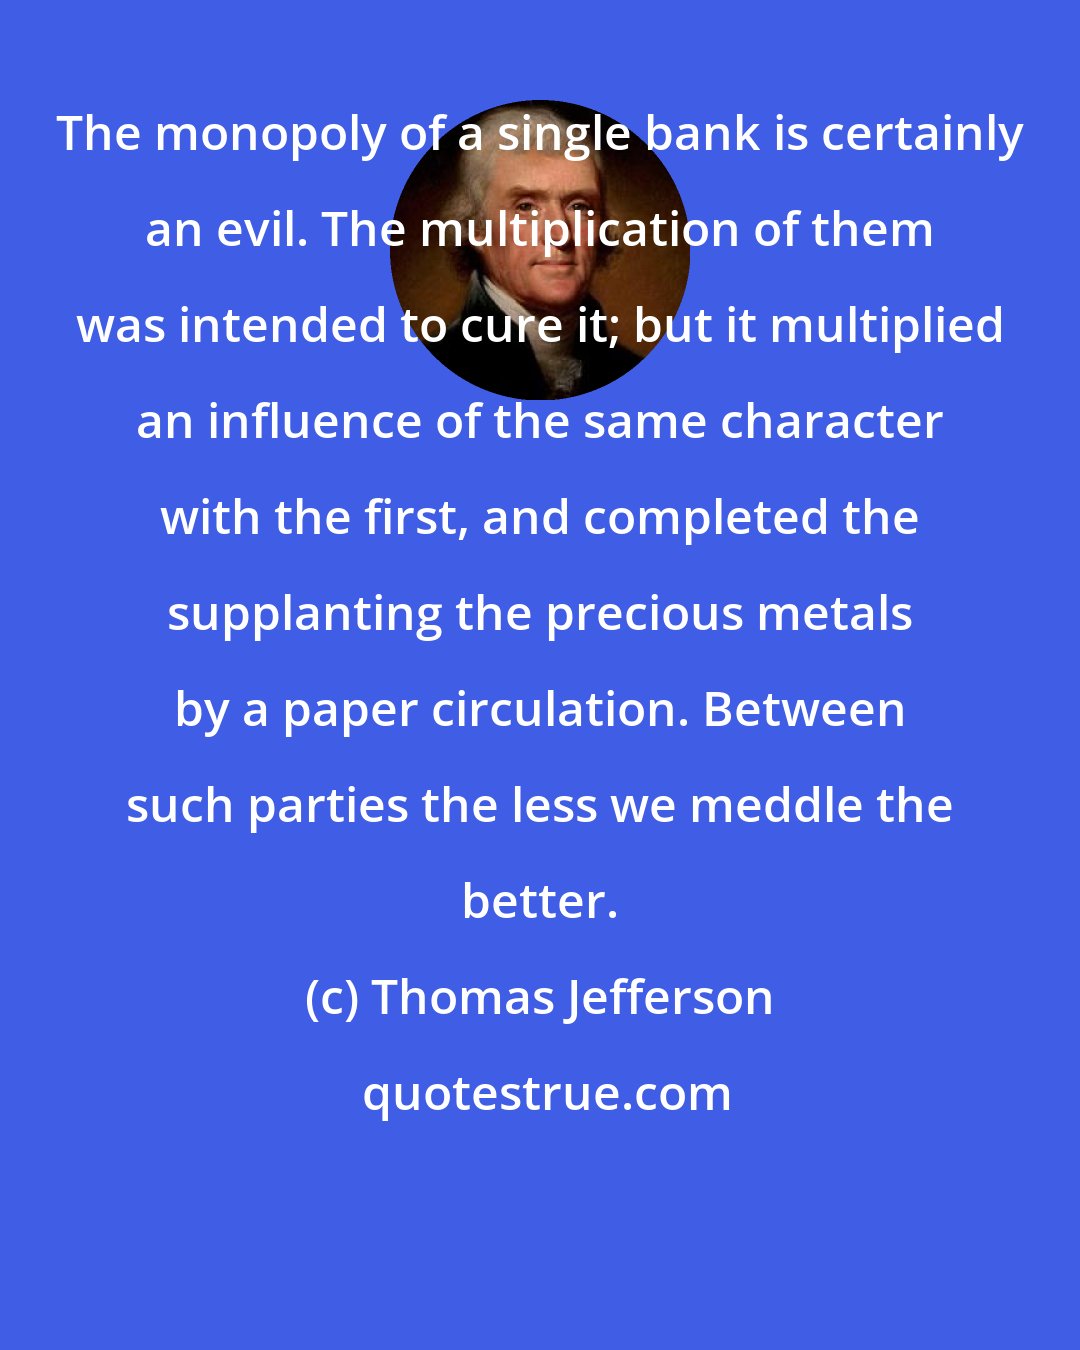 Thomas Jefferson: The monopoly of a single bank is certainly an evil. The multiplication of them was intended to cure it; but it multiplied an influence of the same character with the first, and completed the supplanting the precious metals by a paper circulation. Between such parties the less we meddle the better.